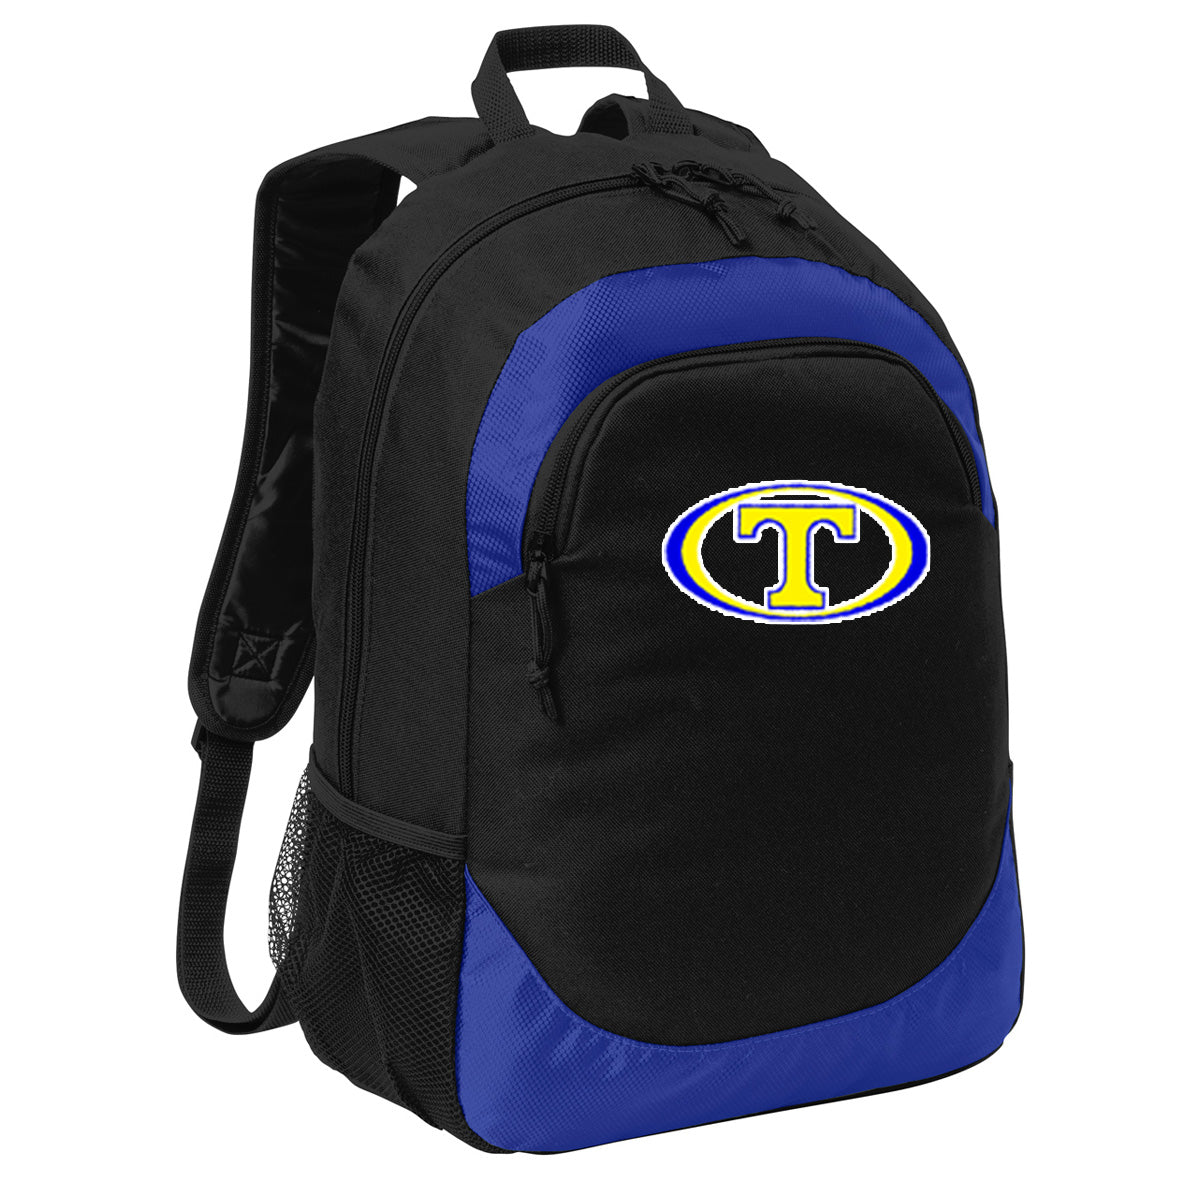 Tattnall - Circuit Backpack with Oval T - Royal/Black (BG217) - Southern Grace Creations